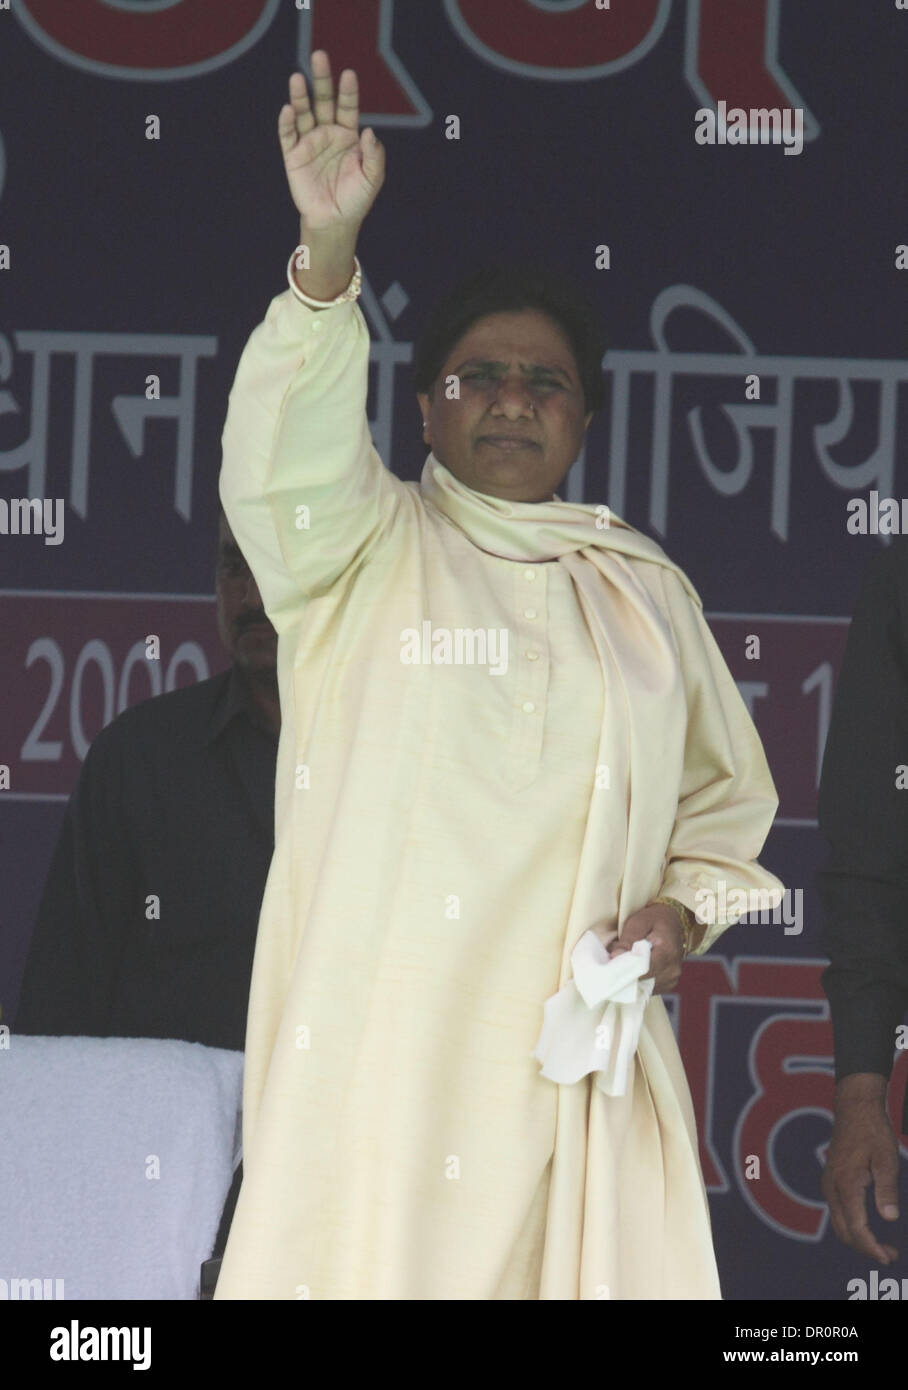 May 04, 2009 - Ghaziabad, India - MAYAWATI, the chief minister of the Indian state Uttar Pradesh and Bahujan Samaj Party (BSP) president, waves to her supporters before addressing a campaign rally. (Credit Image: © Pankaj Nangia/ZUMA Press) Stock Photo